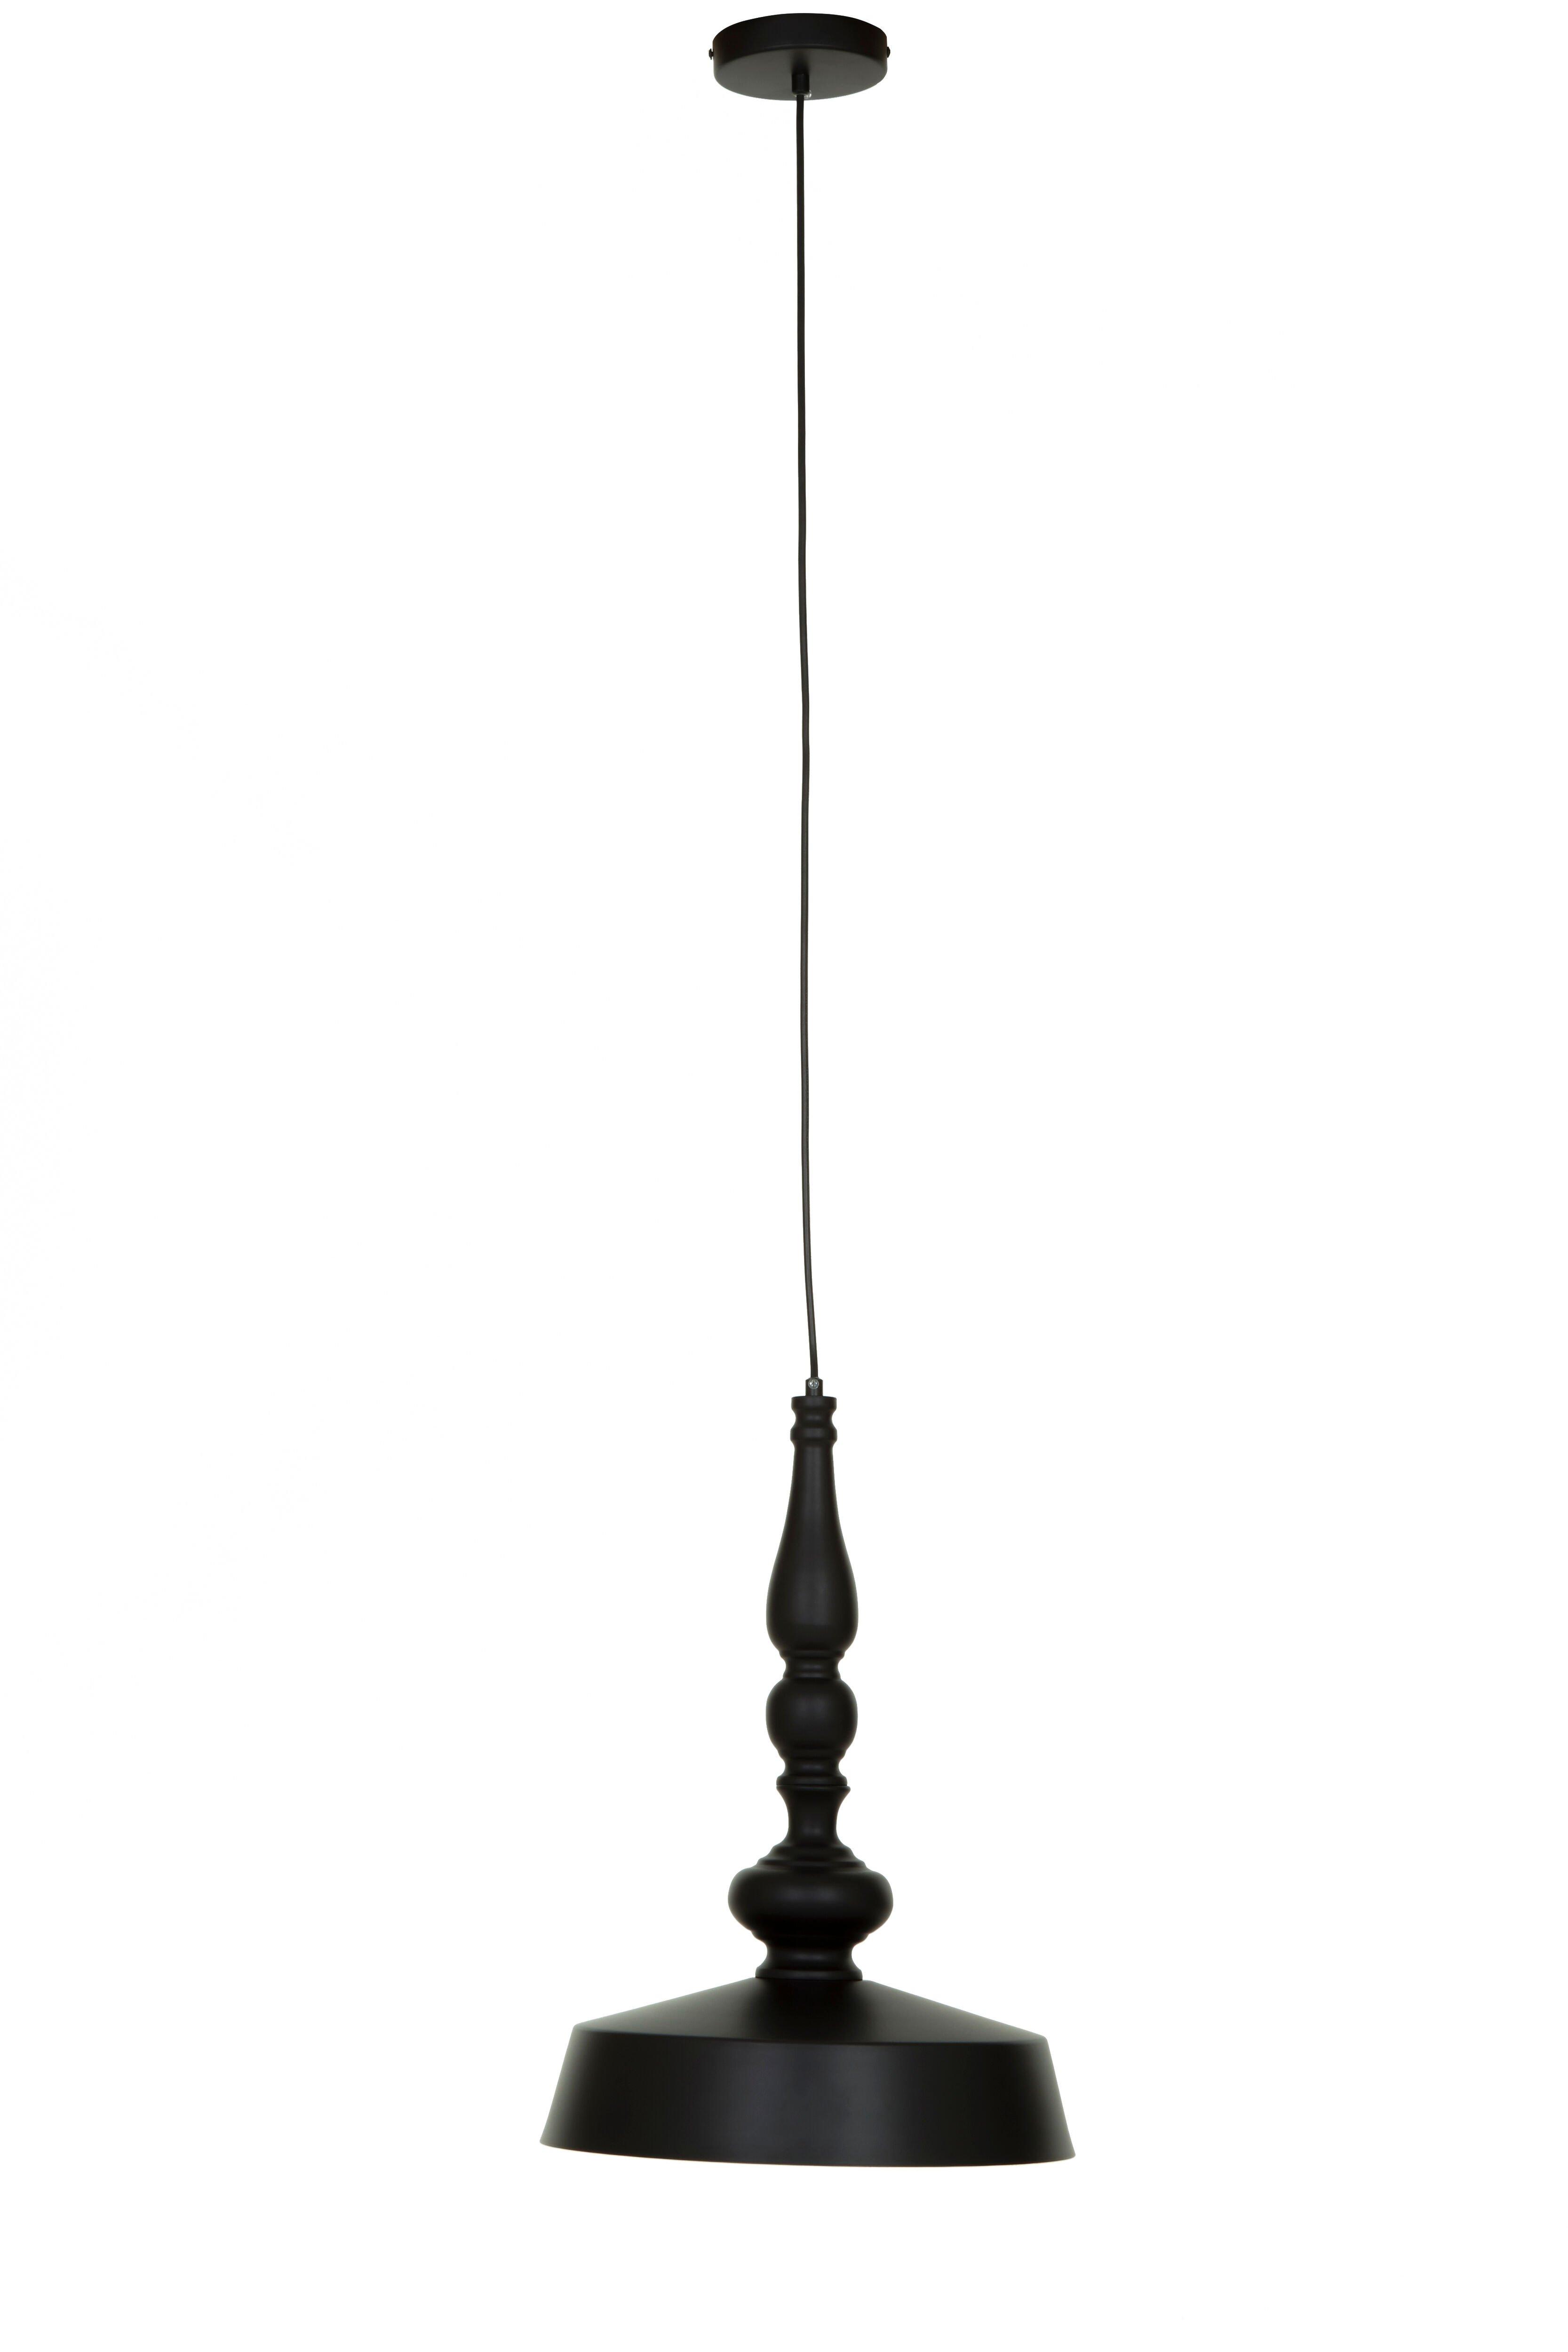 Interiors by Premier Small Leni Black And Gold Pendant Light